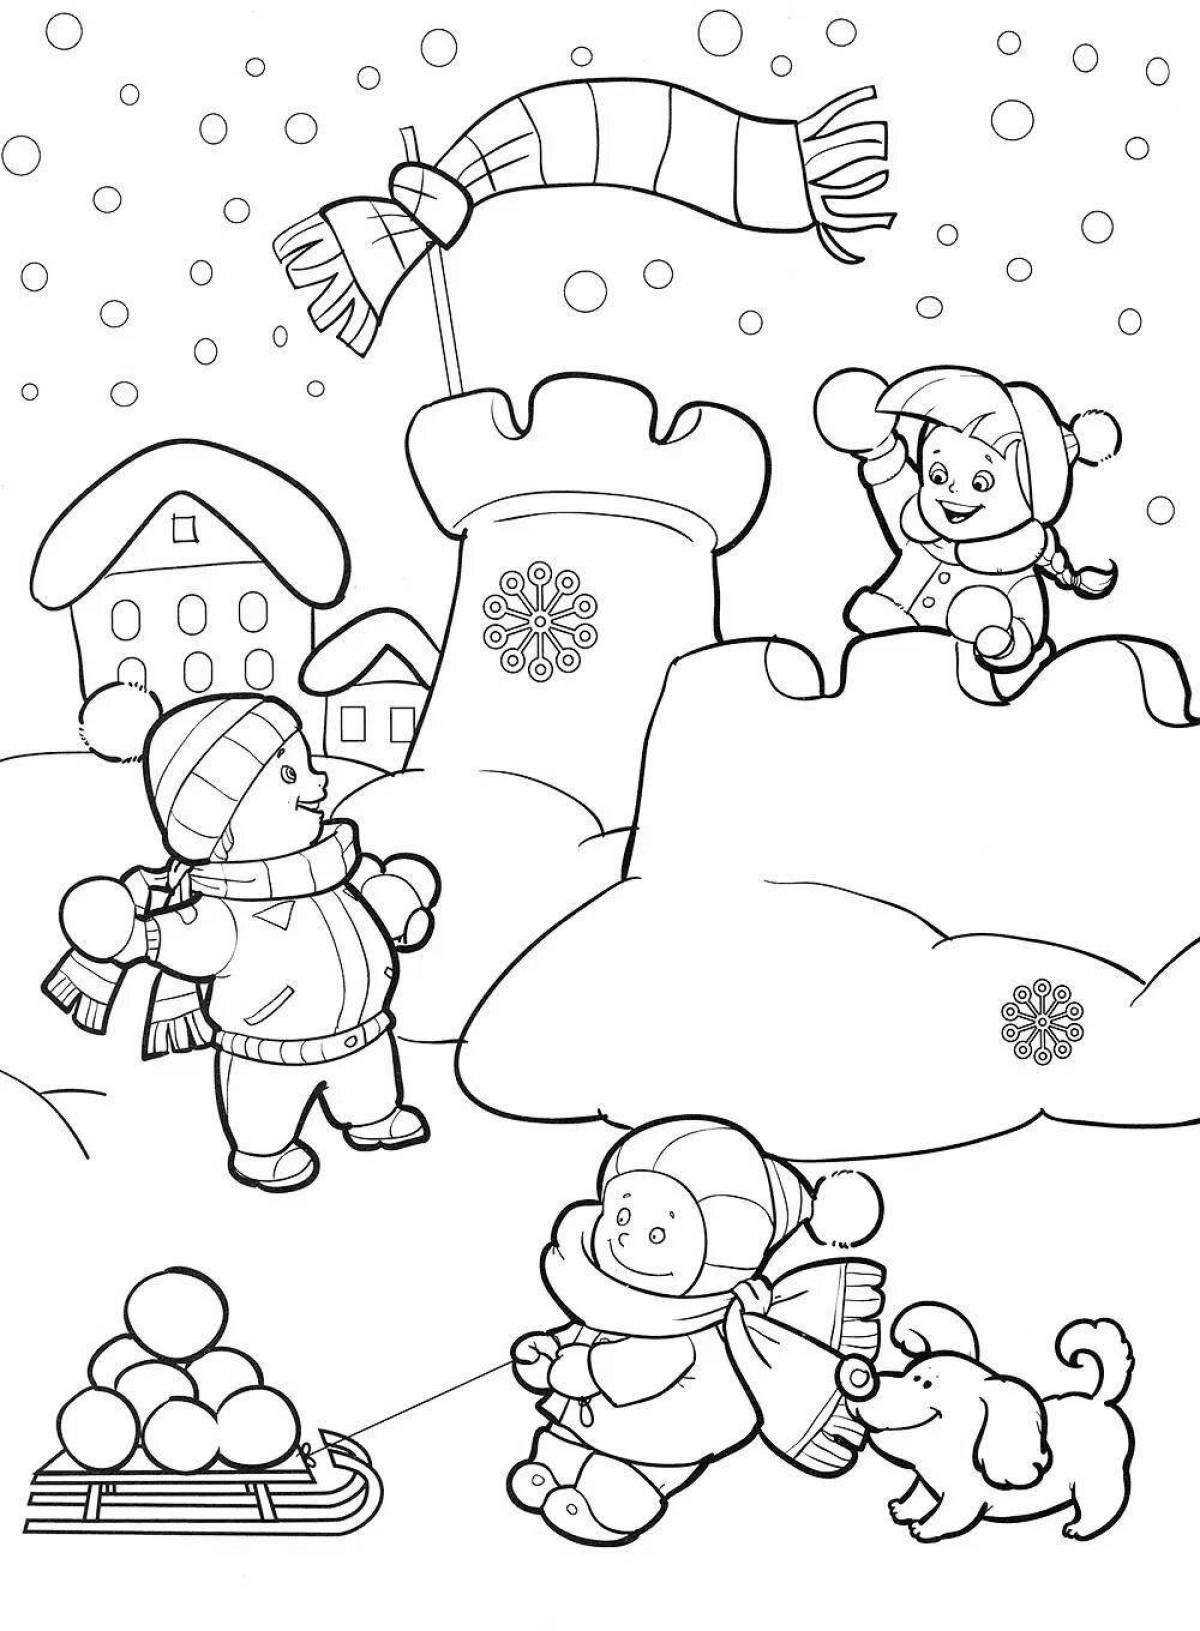 Shiny 5 year old winter coloring book